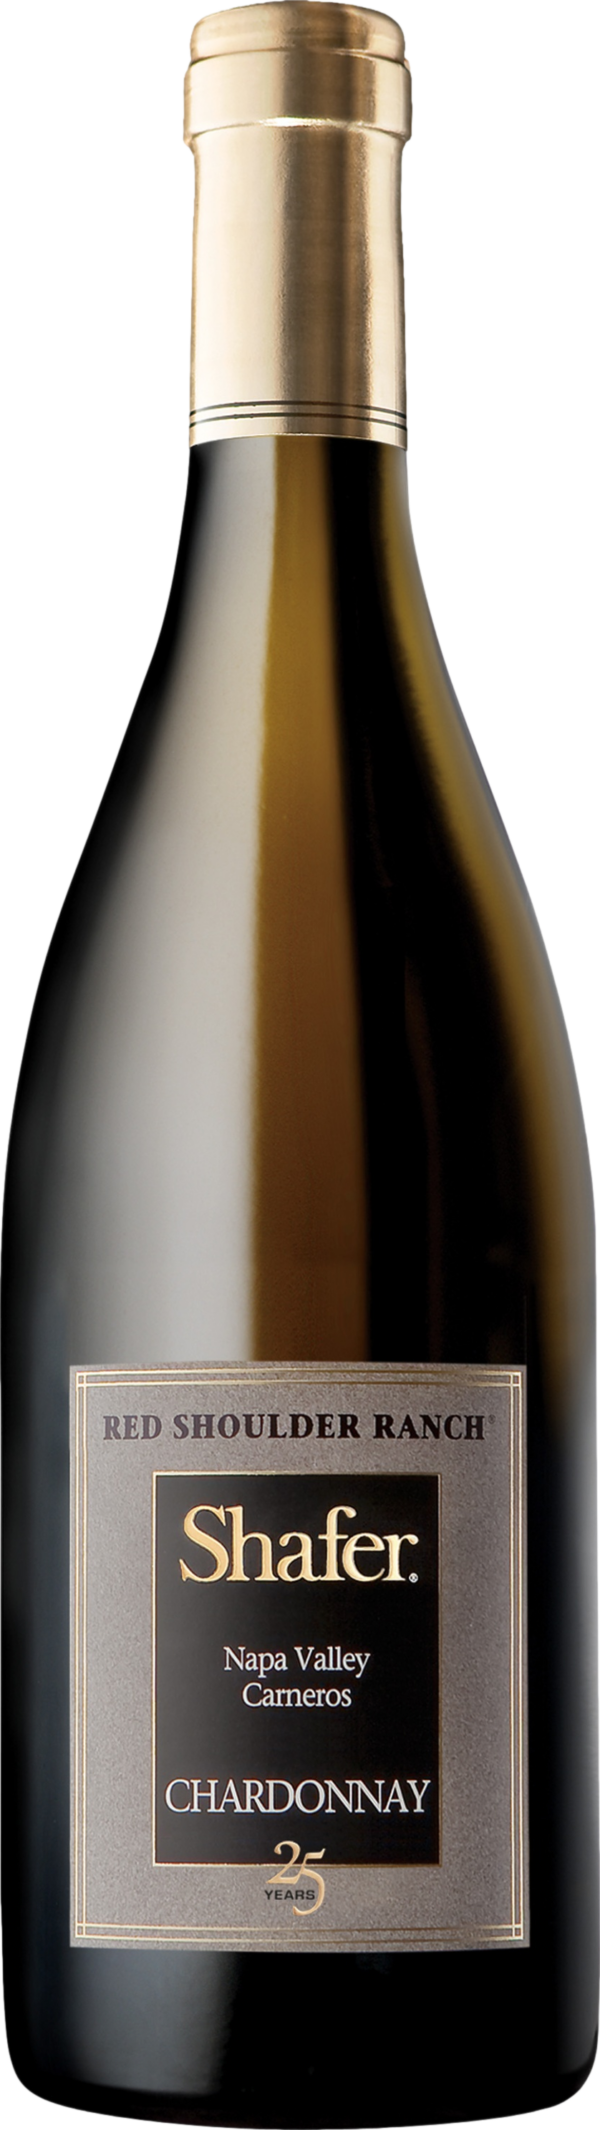 Product image of Shafer Red Shoulder Ranch Chardonnay 2019 from 8wines